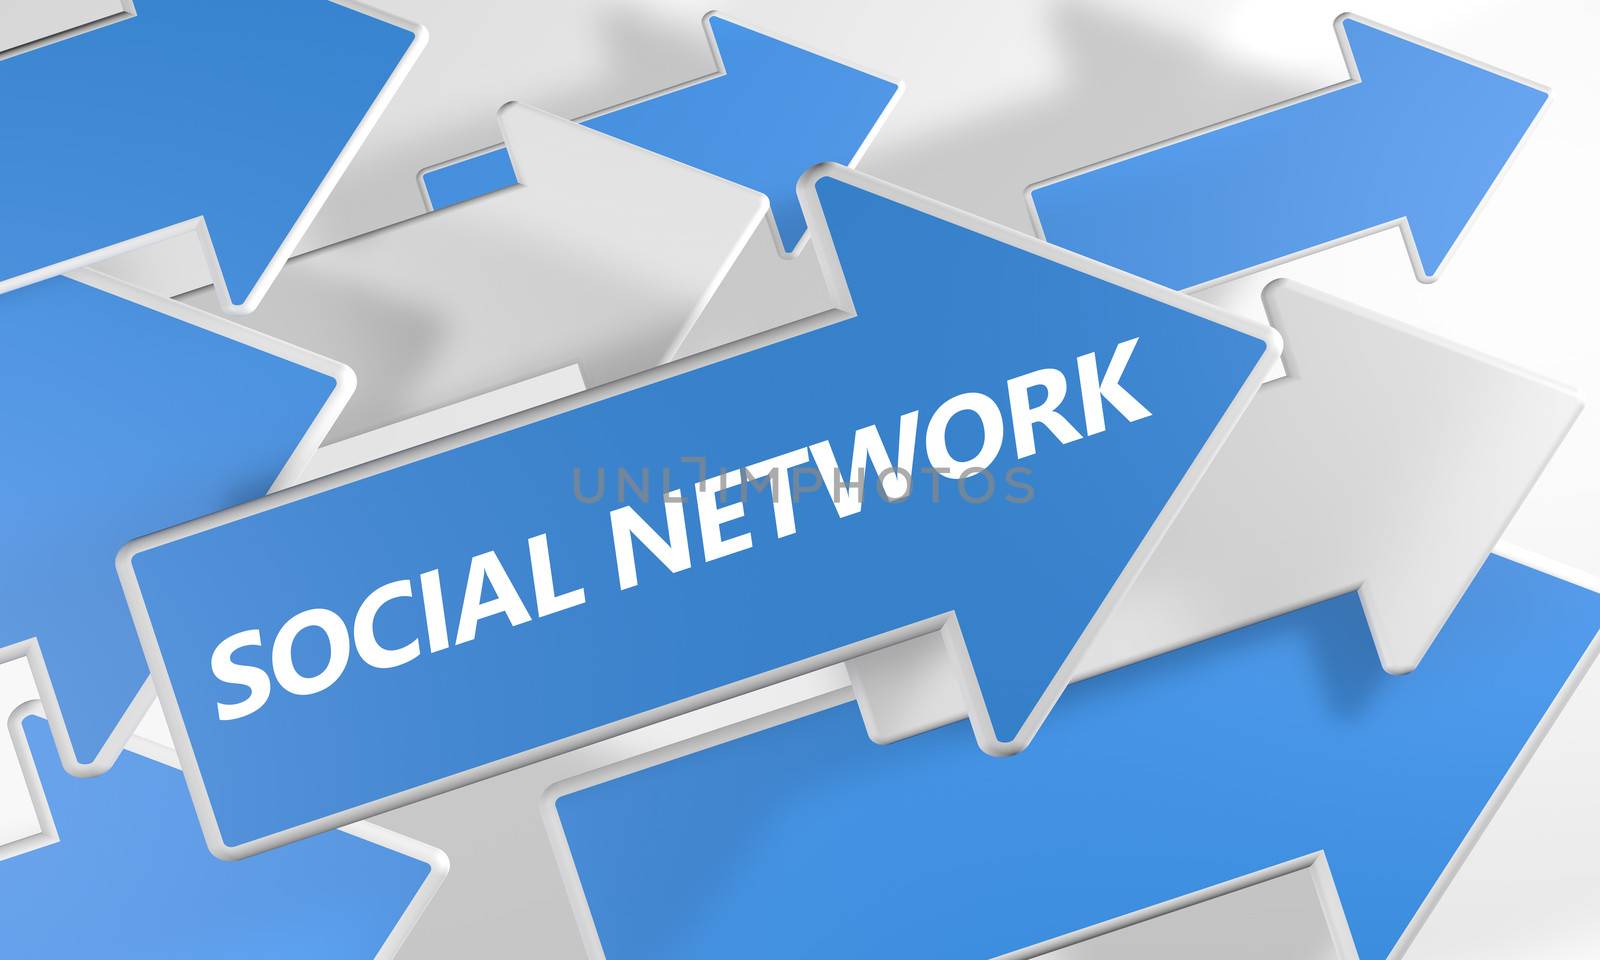 Social Network 3d render concept with blue and white arrows flying upwards over a white background.